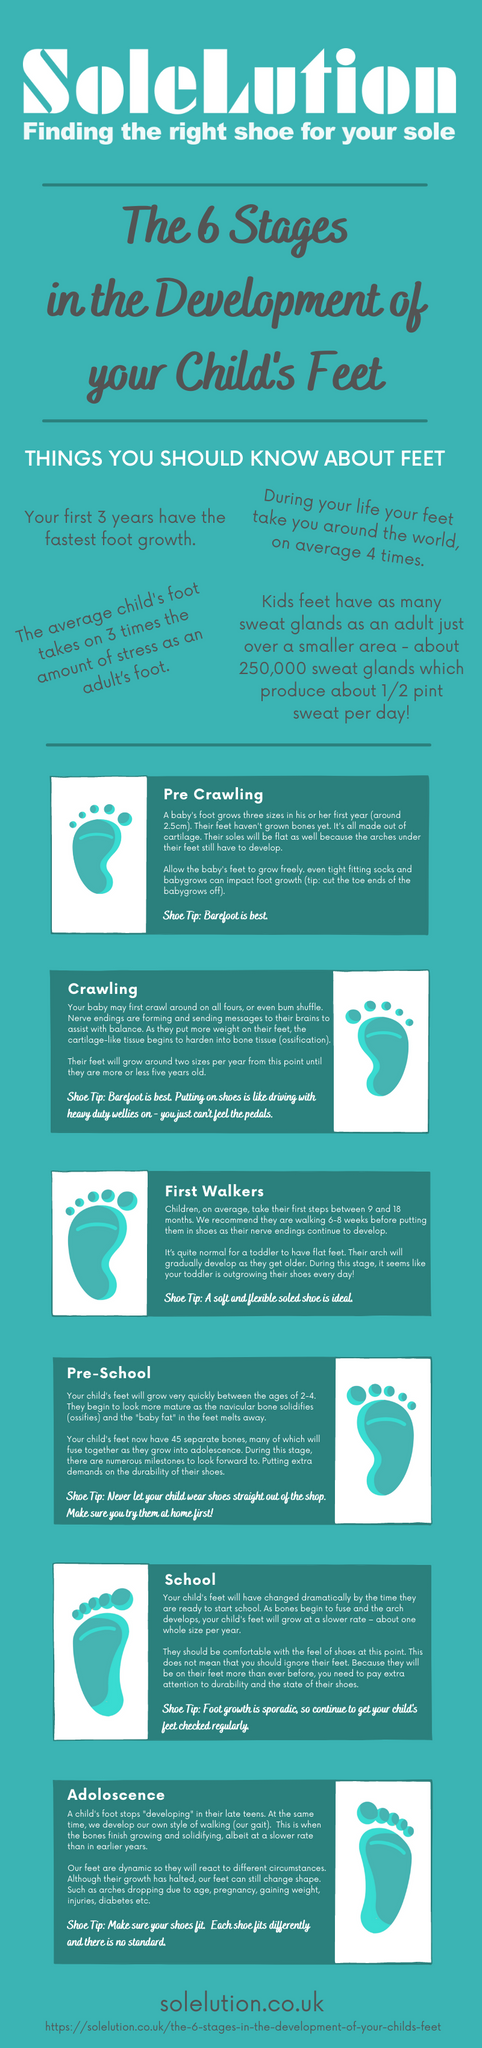 Infographic - 6 Stages of Development